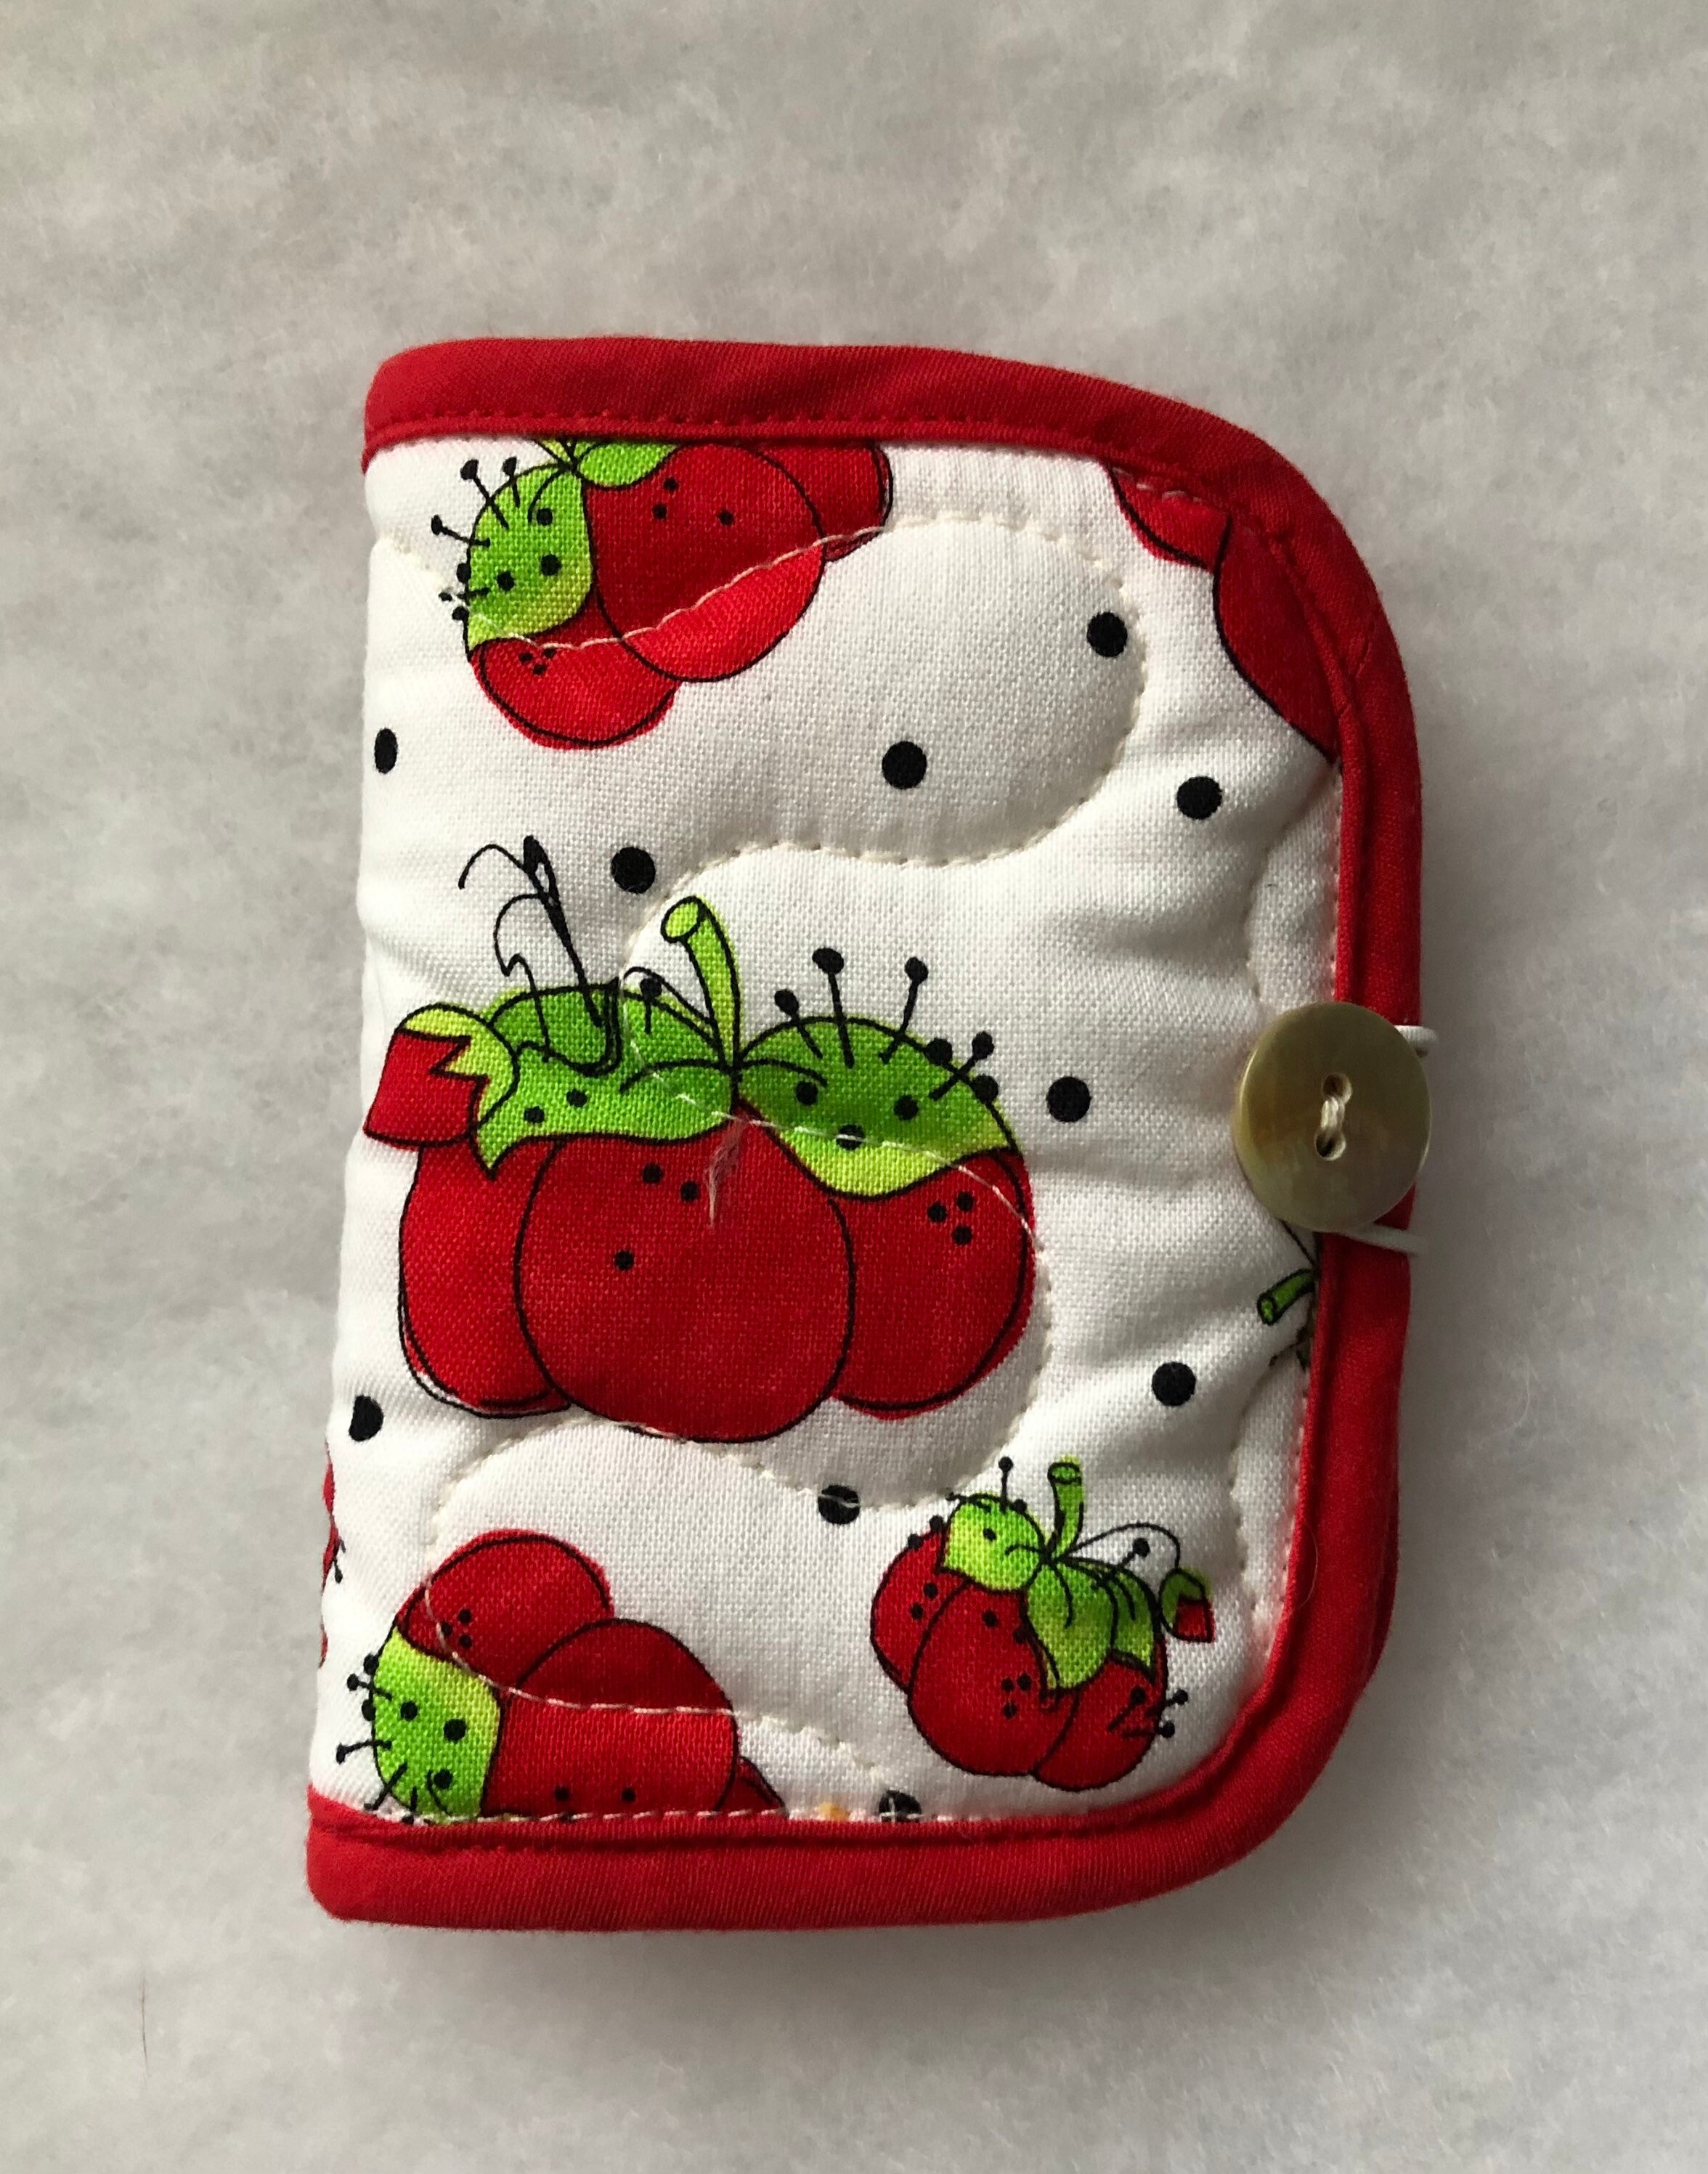 A1 RED GREEN TOMATO STRAWBERRY SEWING PIN CUSHION 2 x 1.5 in